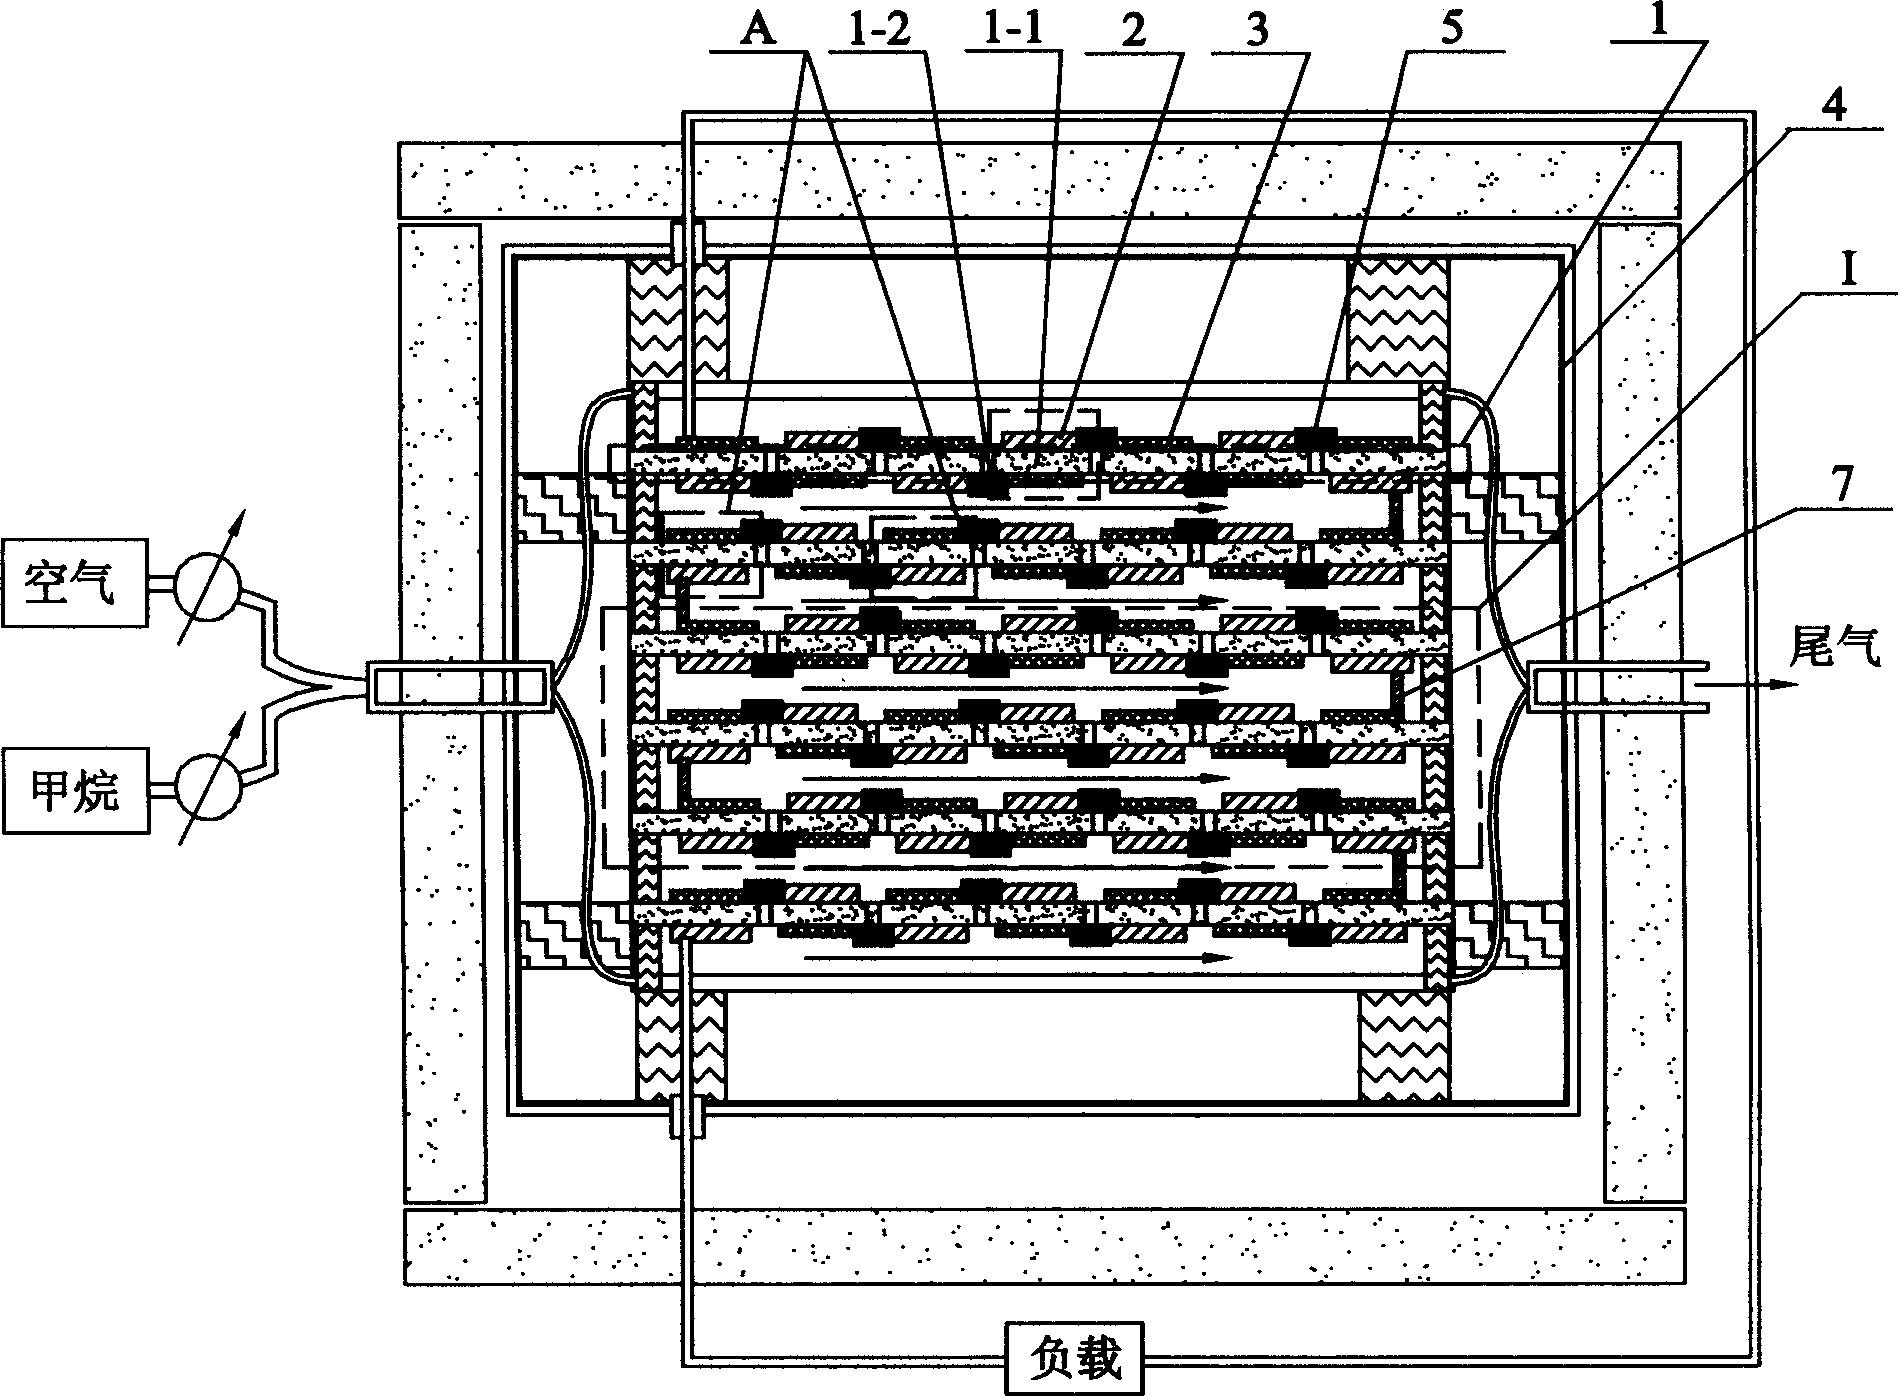 Group battery composed of single air chamber solid oxide fuel cell